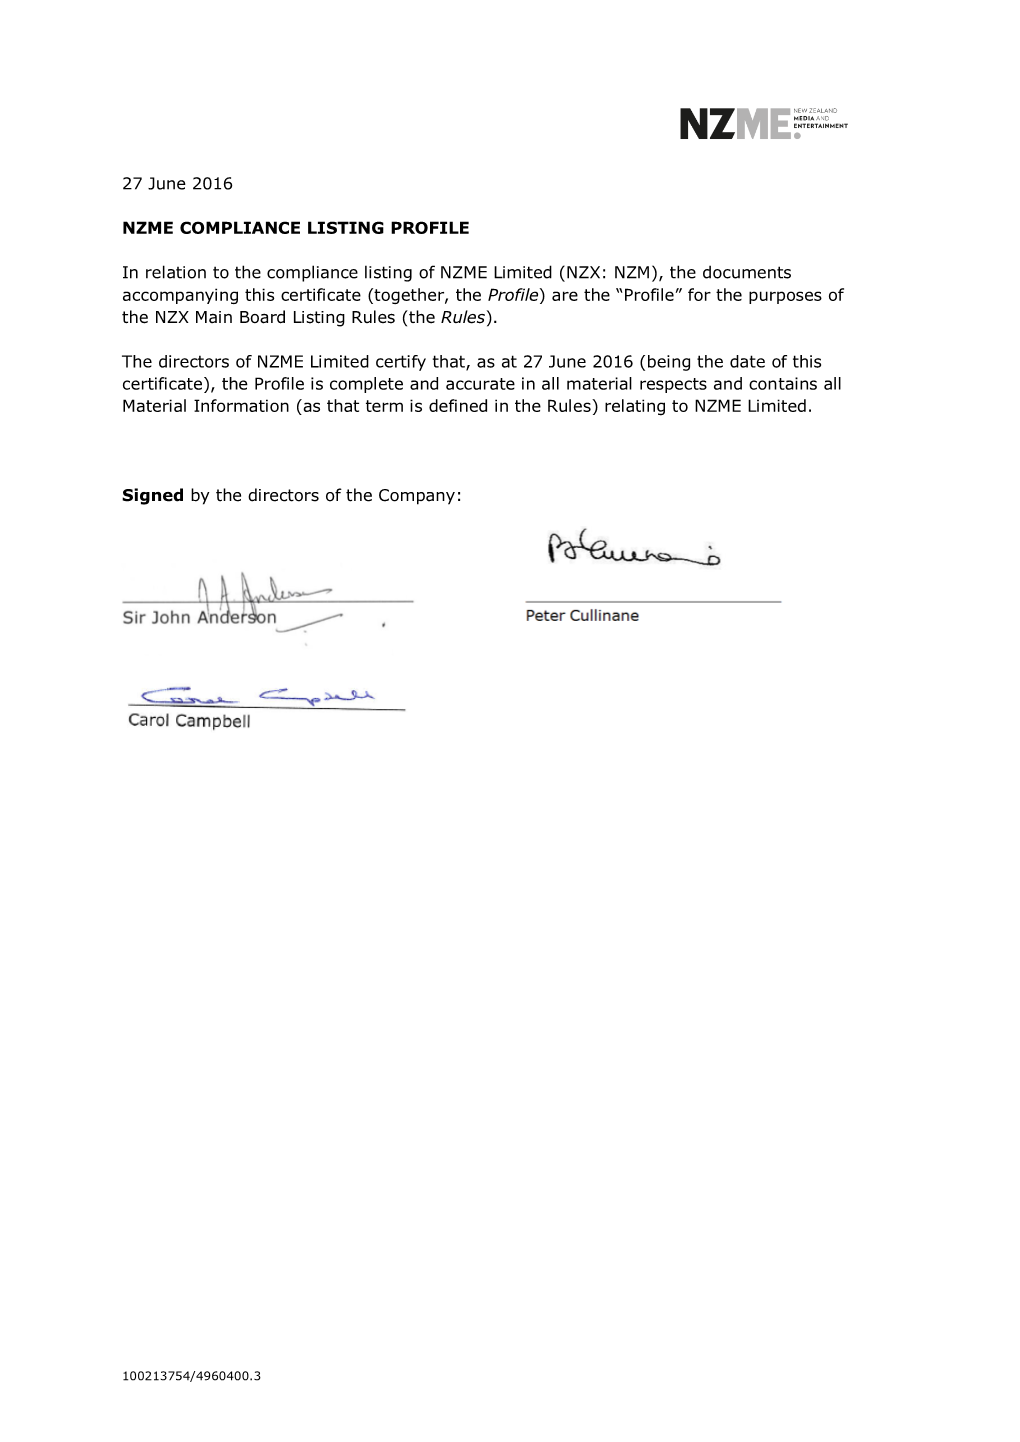 NZX: NZM), the Documents Accompanying This Certificate (Together, the Profile) Are the “Profile” for the Purposes of the NZX Main Board Listing Rules (The Rules)